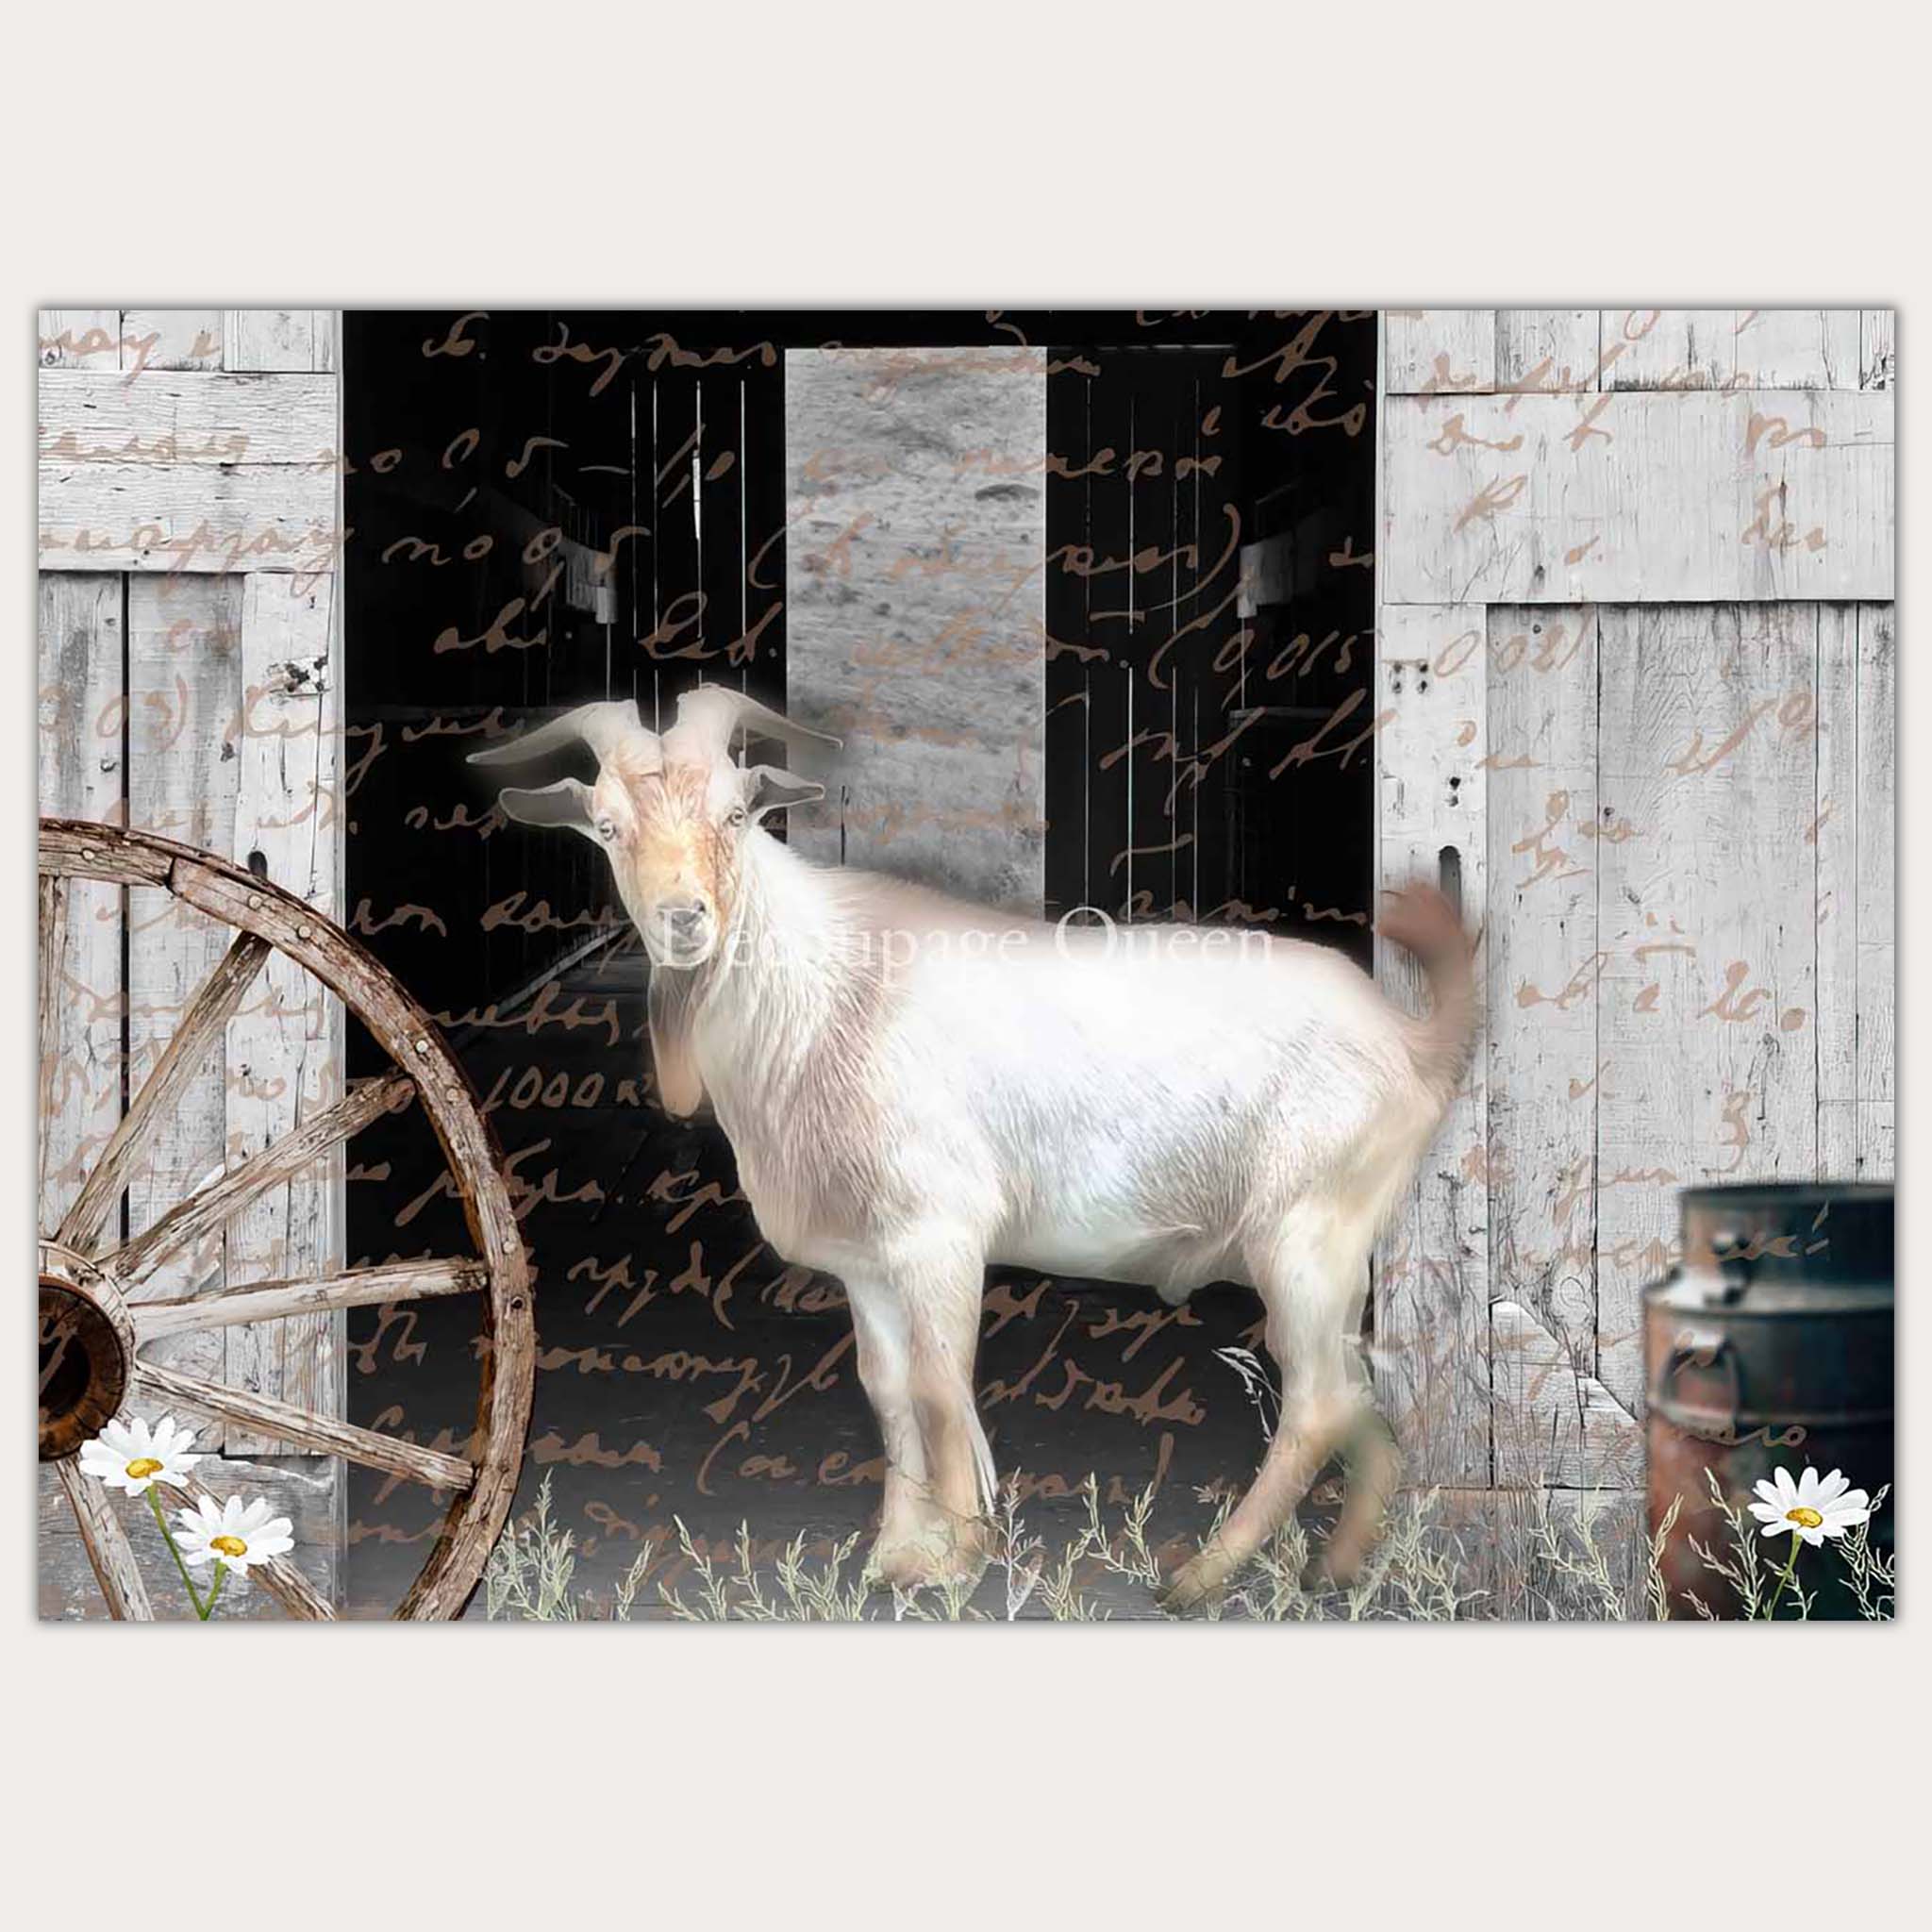 A3 rice paper design that features a Billy goat standing in front of an open barn door. Scribbled script writing is throughout the design. The paper sits on a white background.